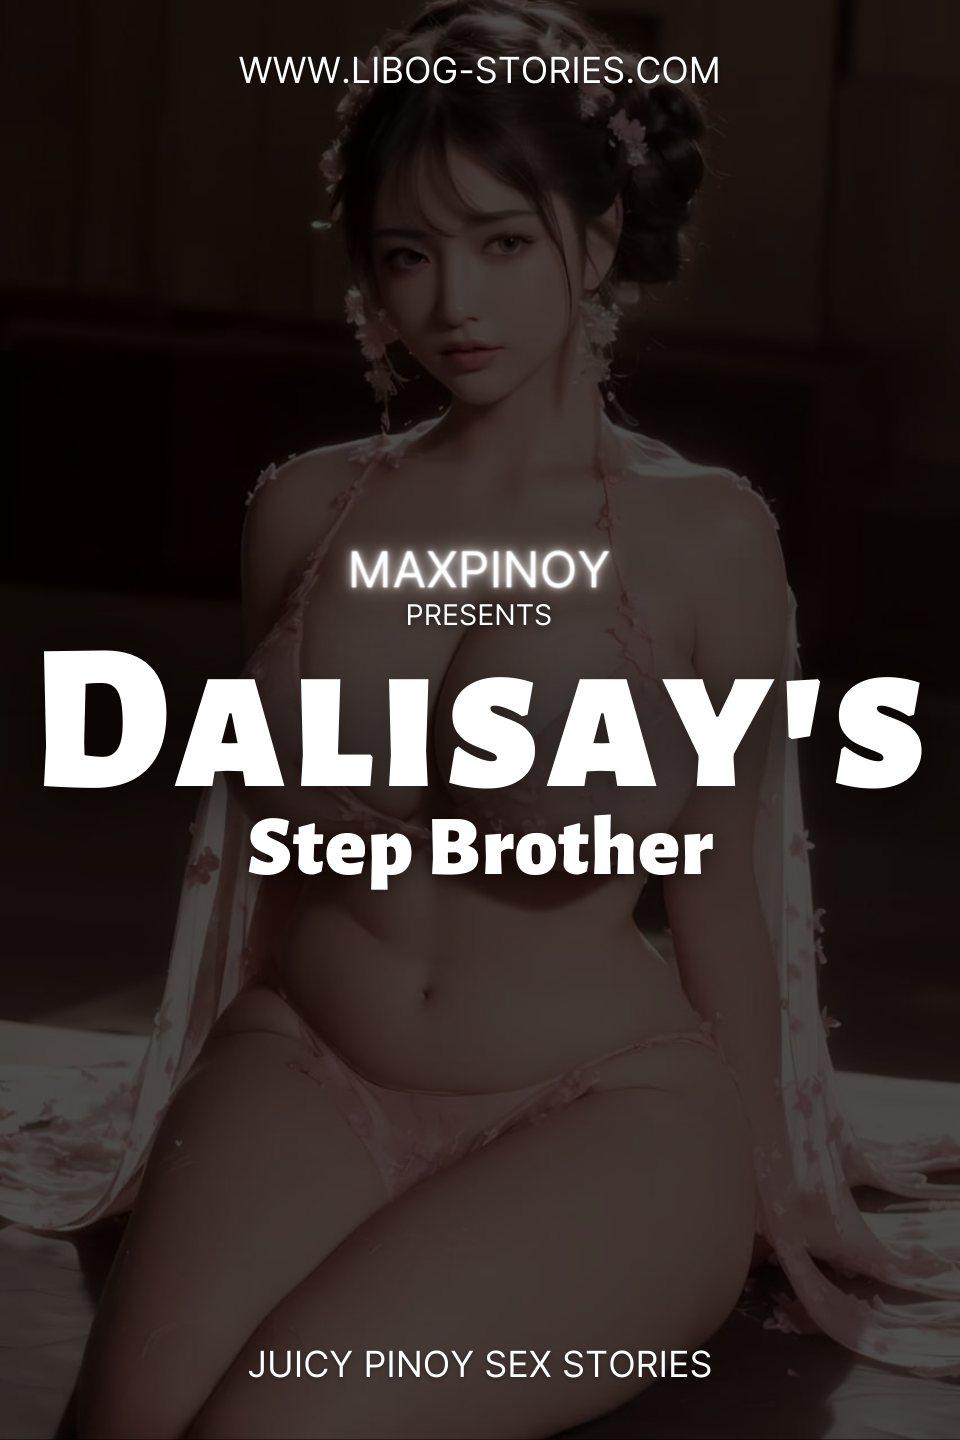 Dalisay's Step Brother